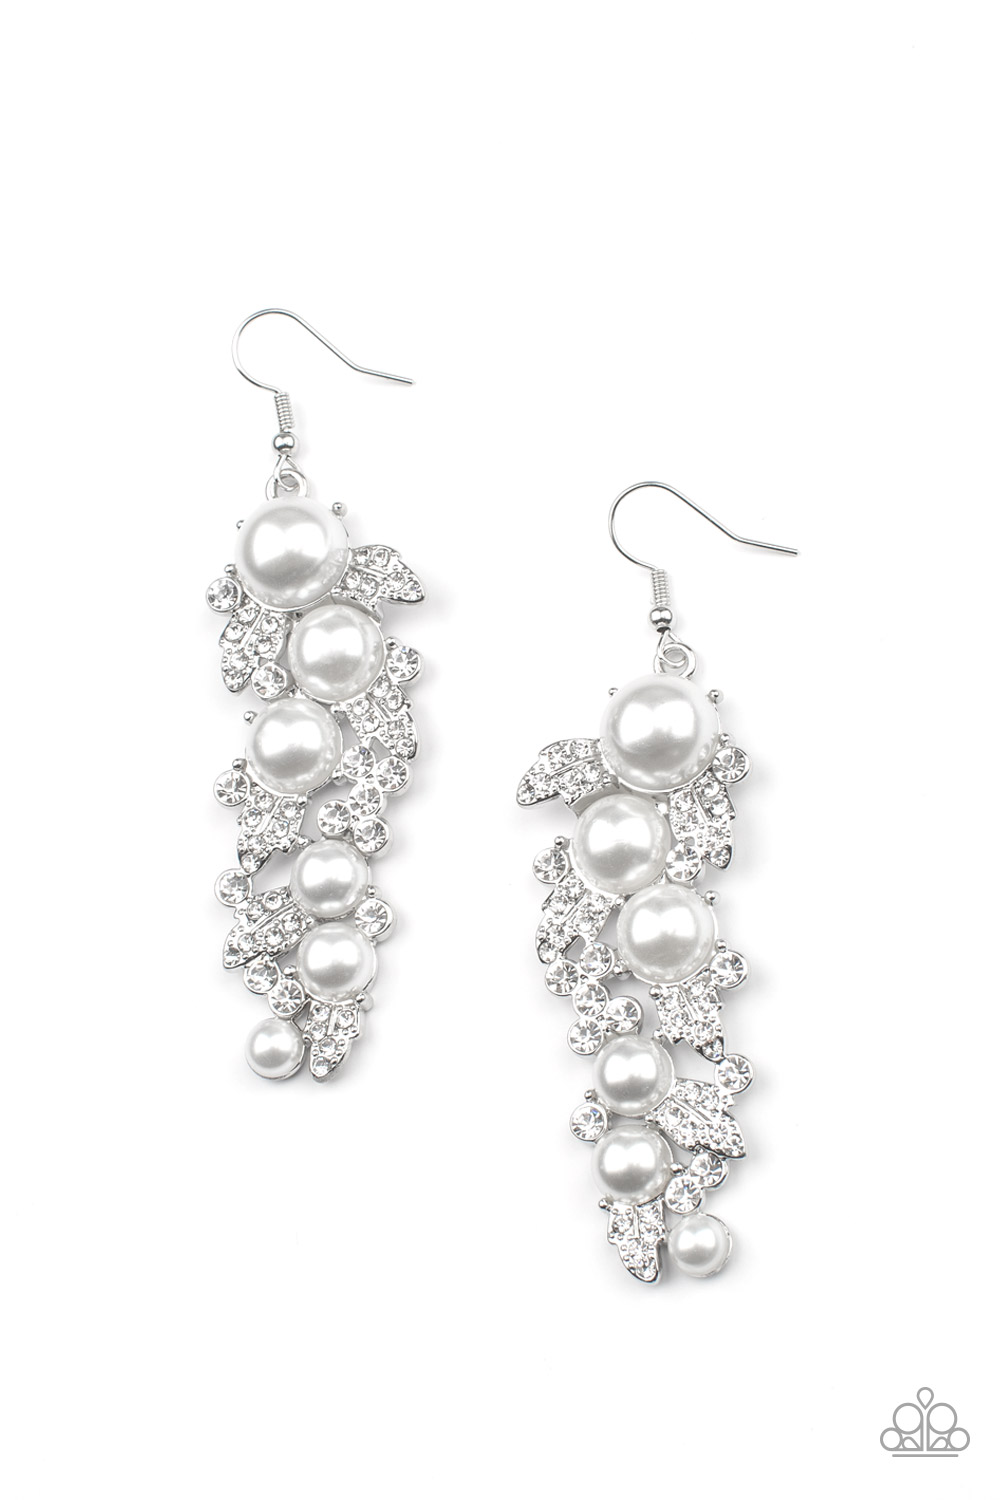 Paparazzi The Party Has Arrived - White Pearl Earrings